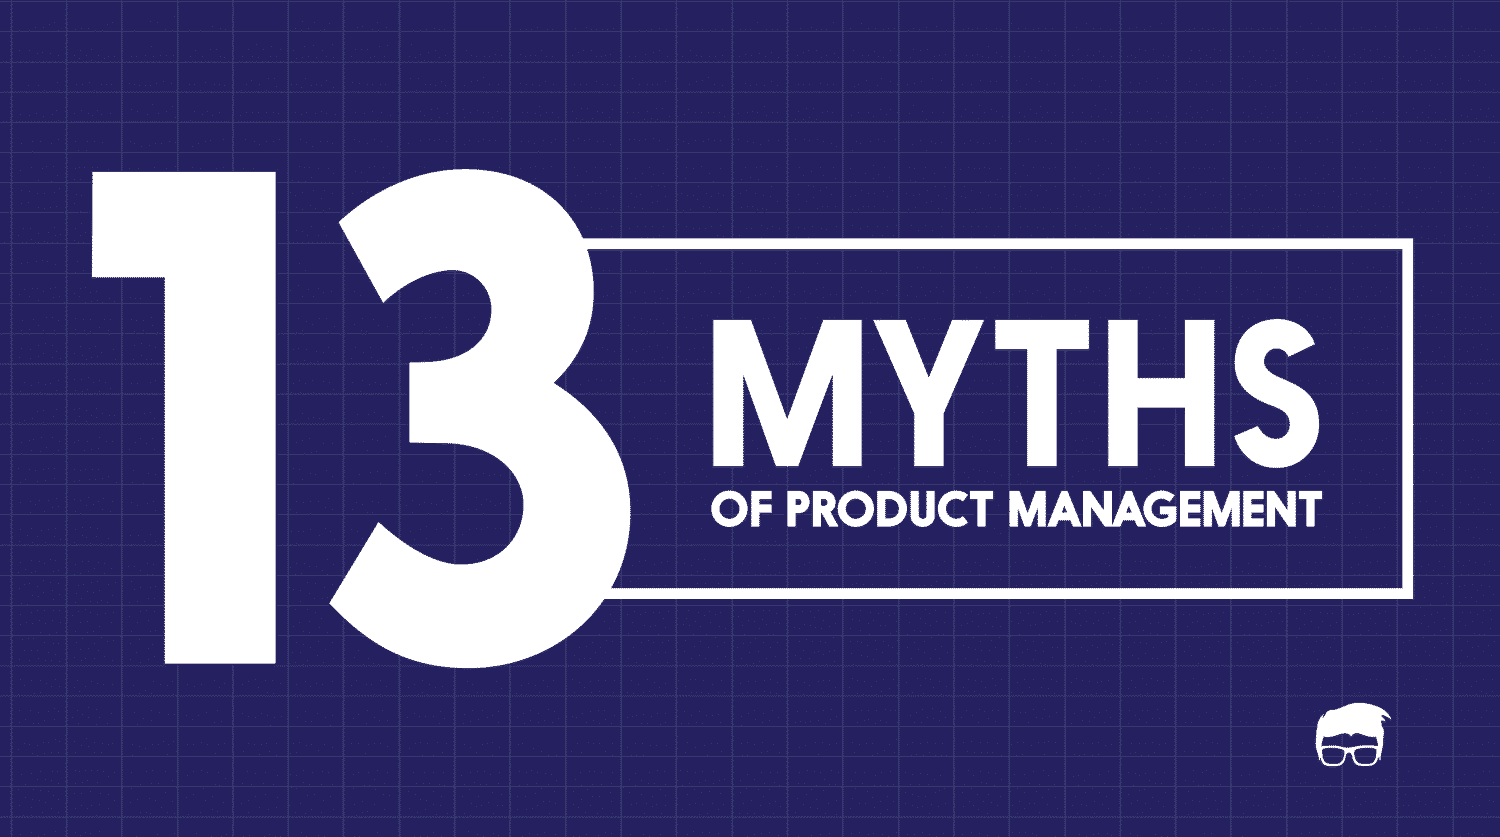 Top 13 Myths Of Product Management